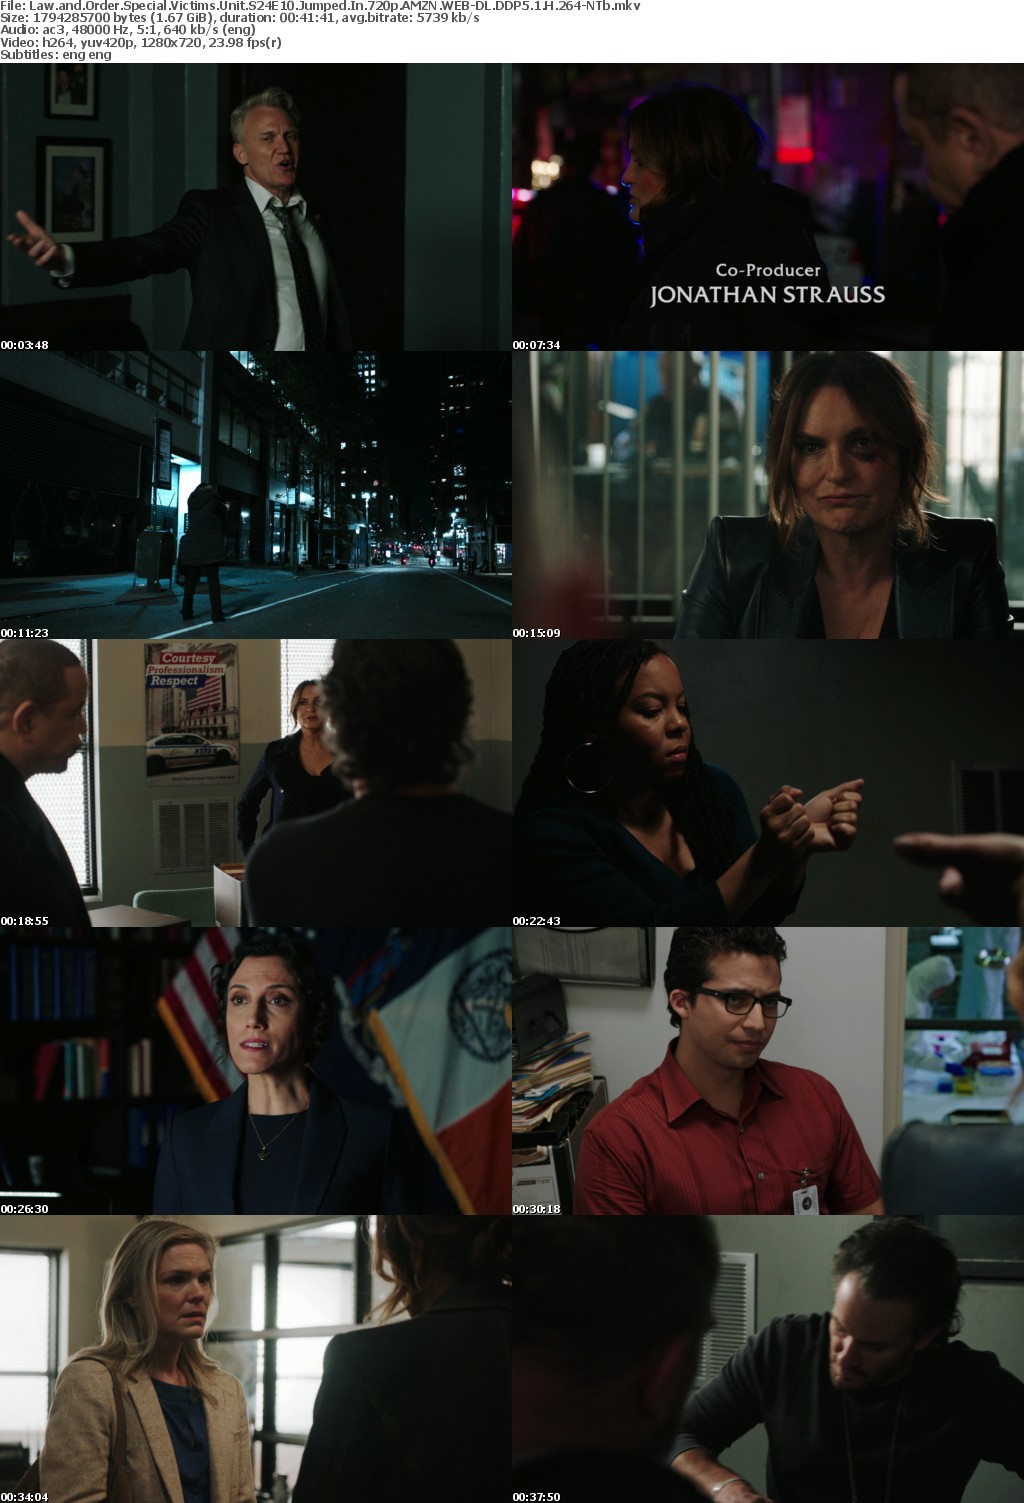 Law and Order SVU S24E10 Jumped In 720p AMZN WEBRip DDP5 1 x264-NTb